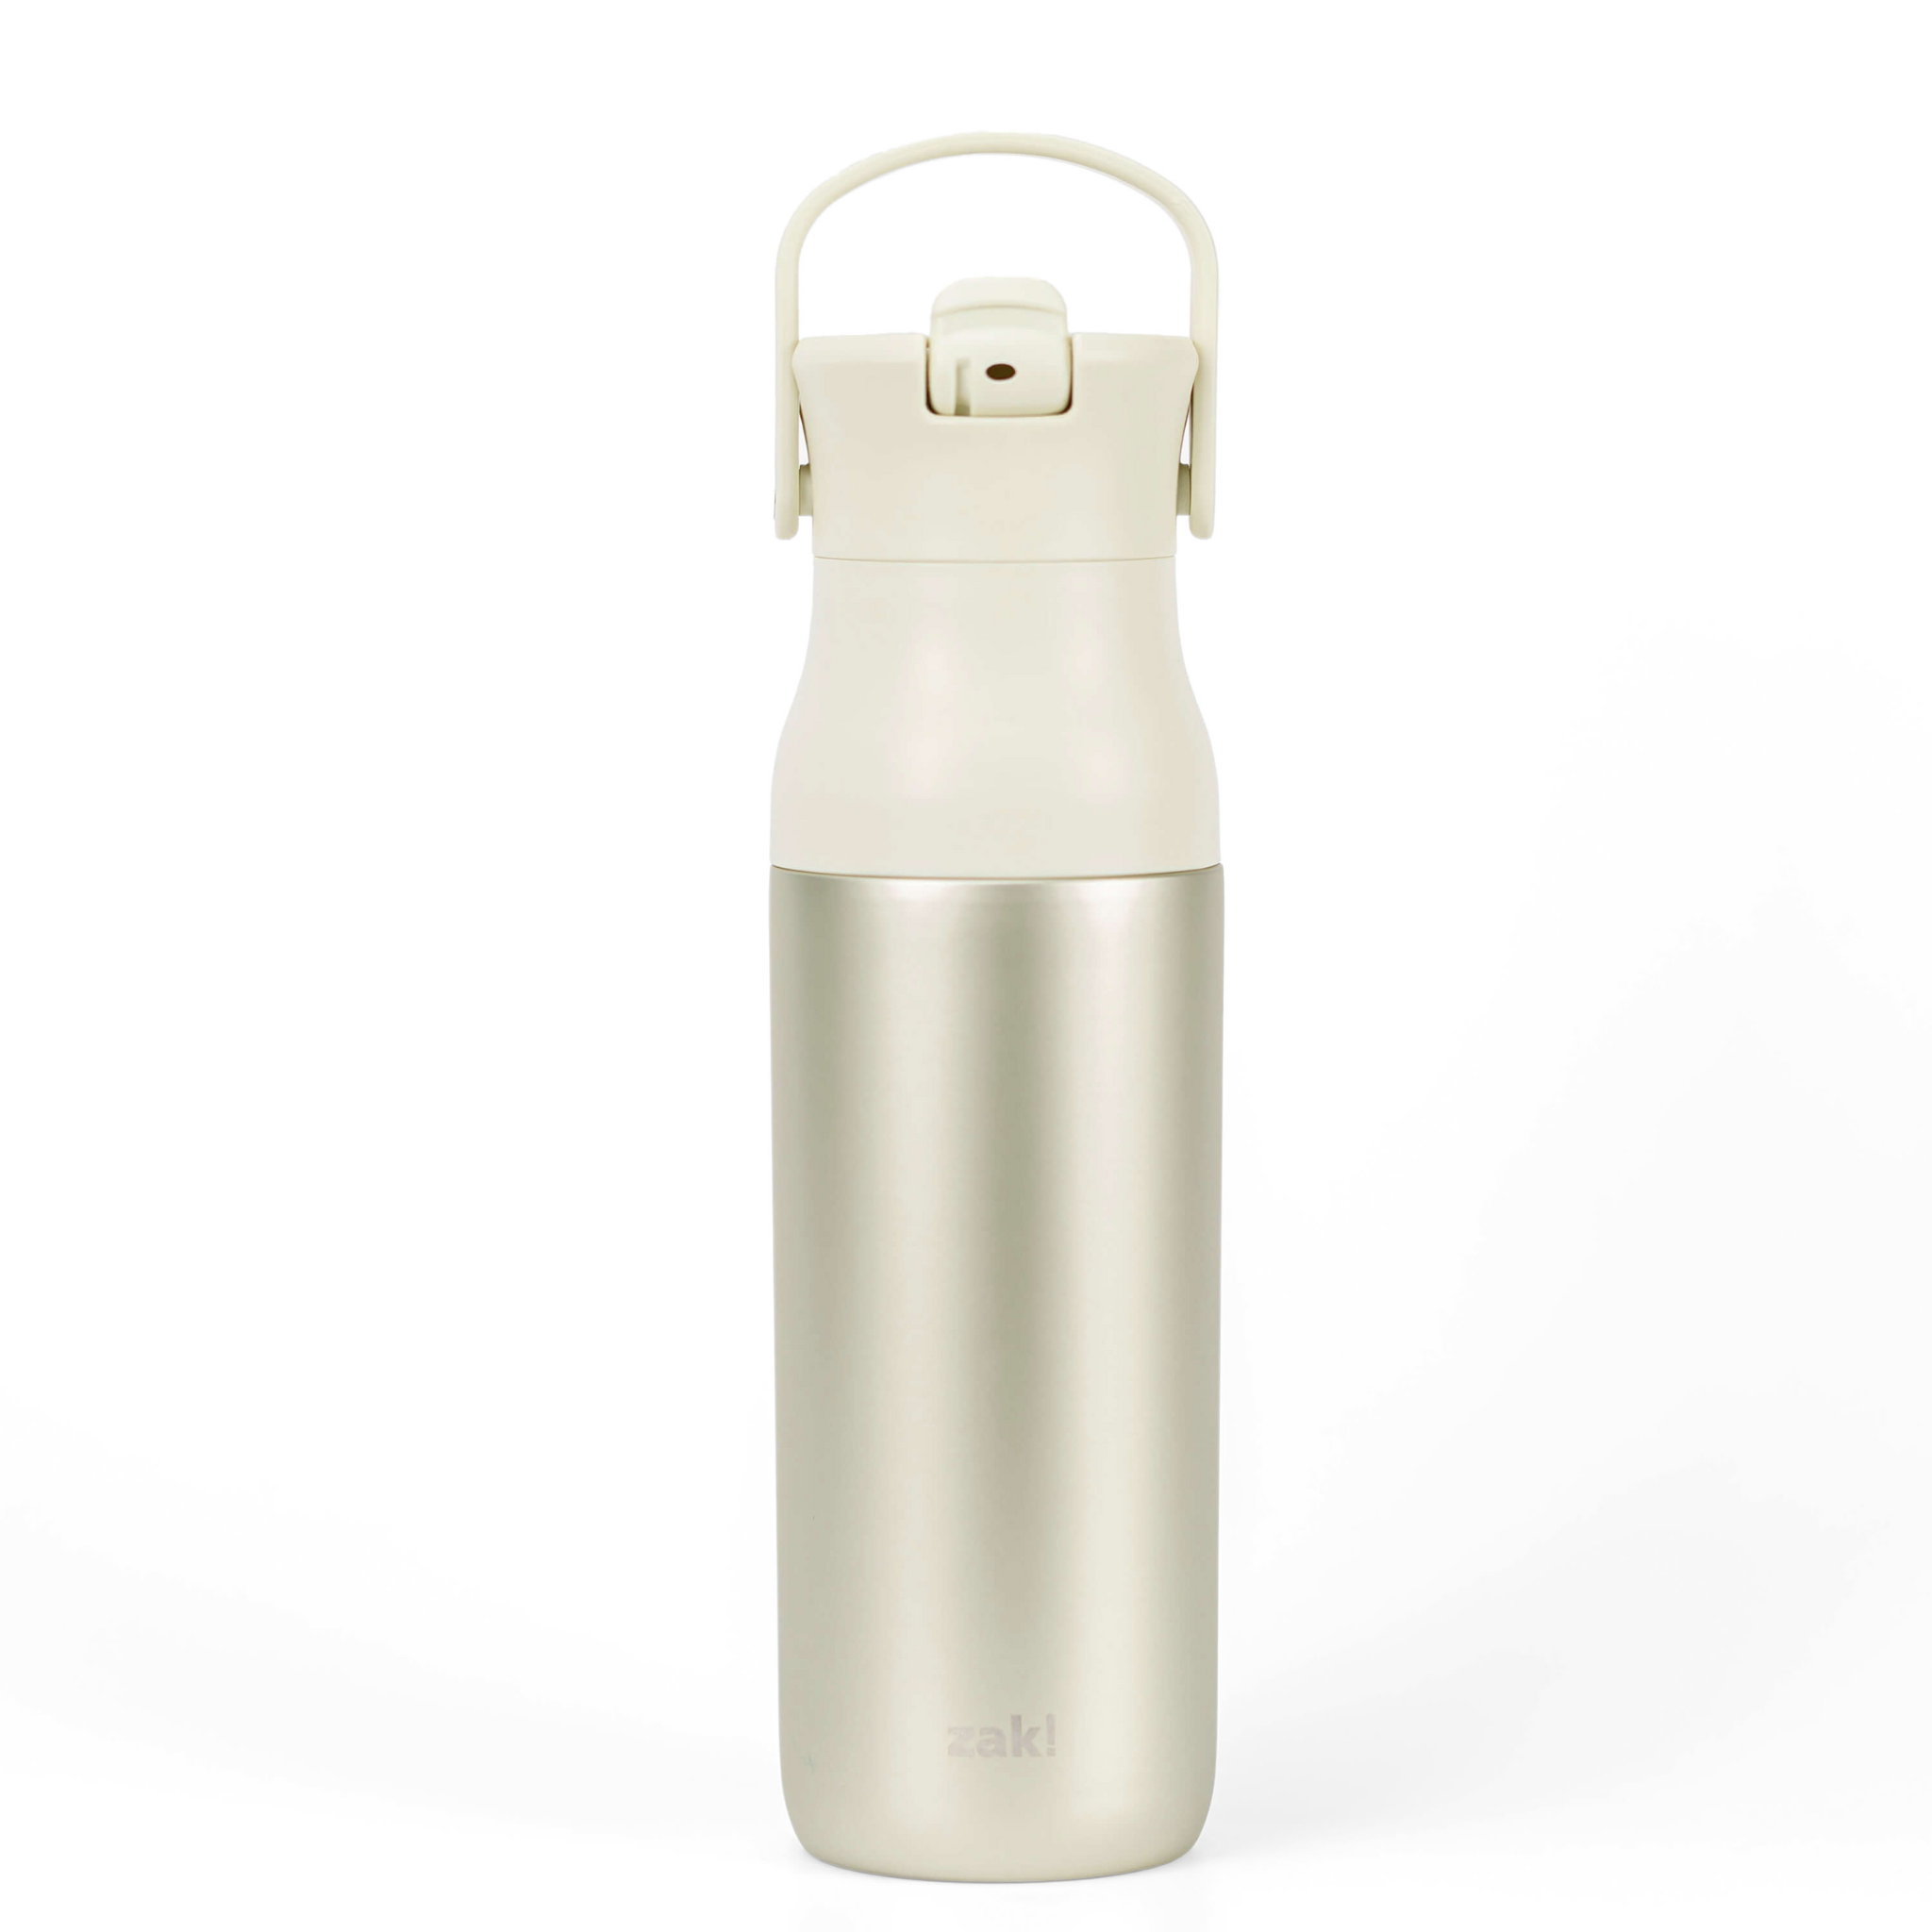 Harmony Recycled Stainless Steel Insulated Water Bottle with Flip